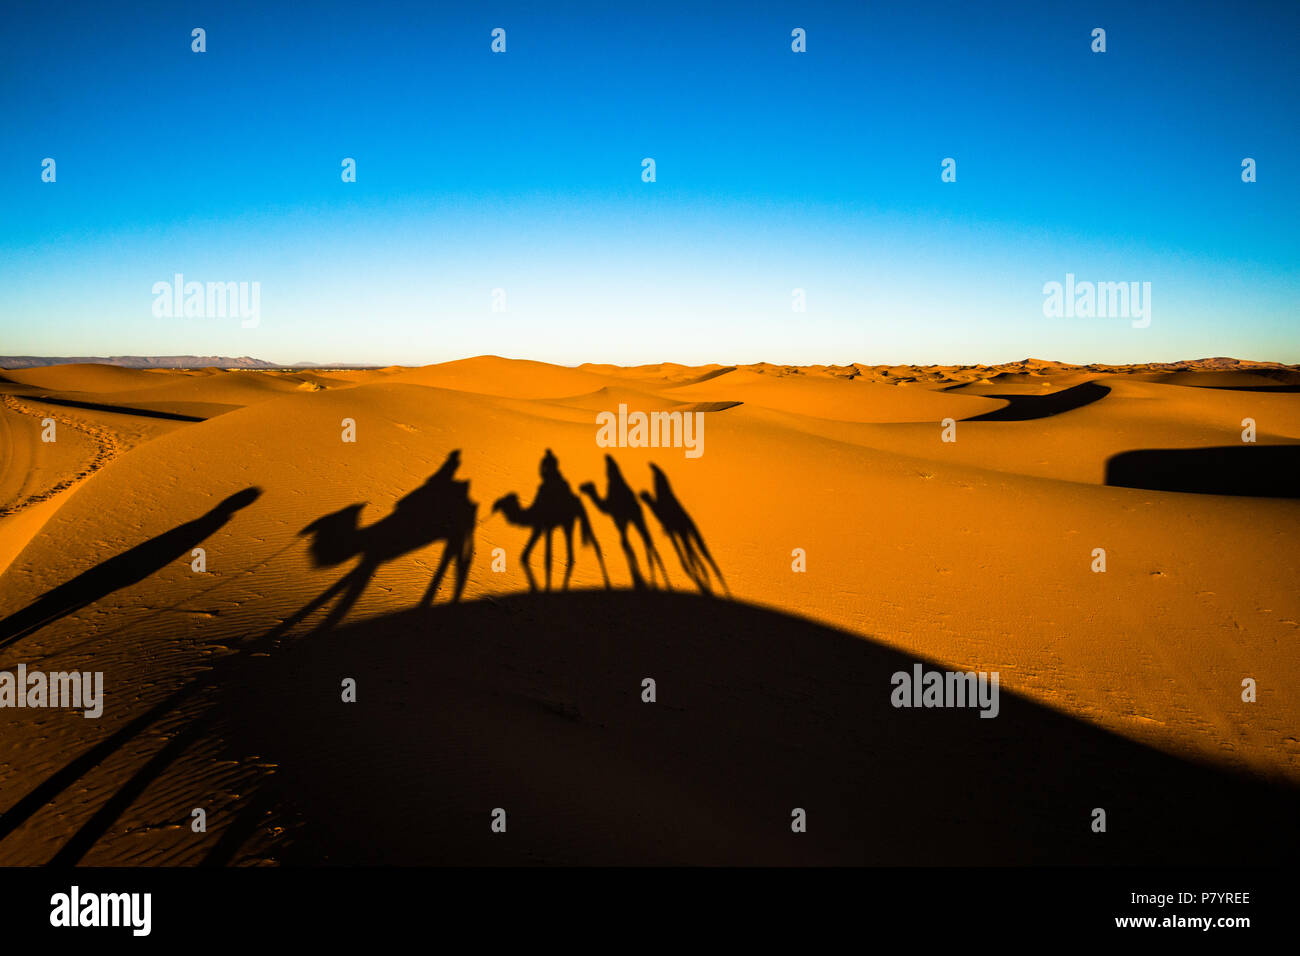 Wide angle shot of people riding camels in caravan over the sand dunes in Sahara desert with camel shadows on a sand Stock Photo